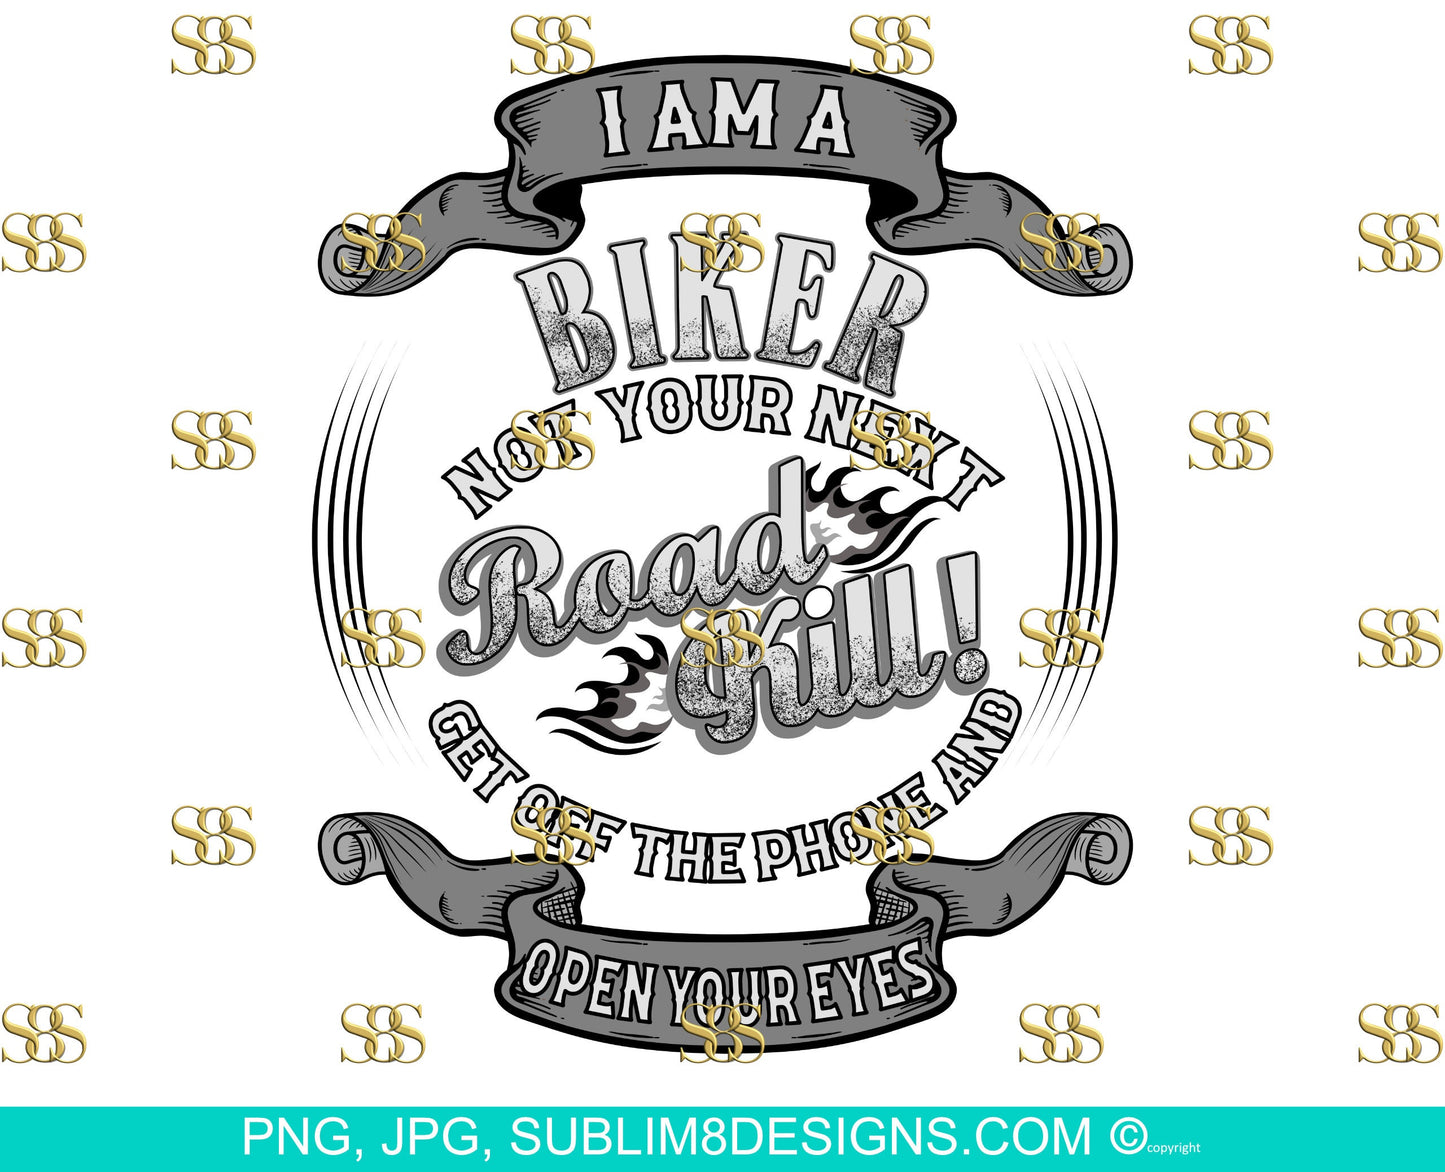 I Am A Biker Not Your Next Road Kill Sublimation Design PNG and JPG ONLY